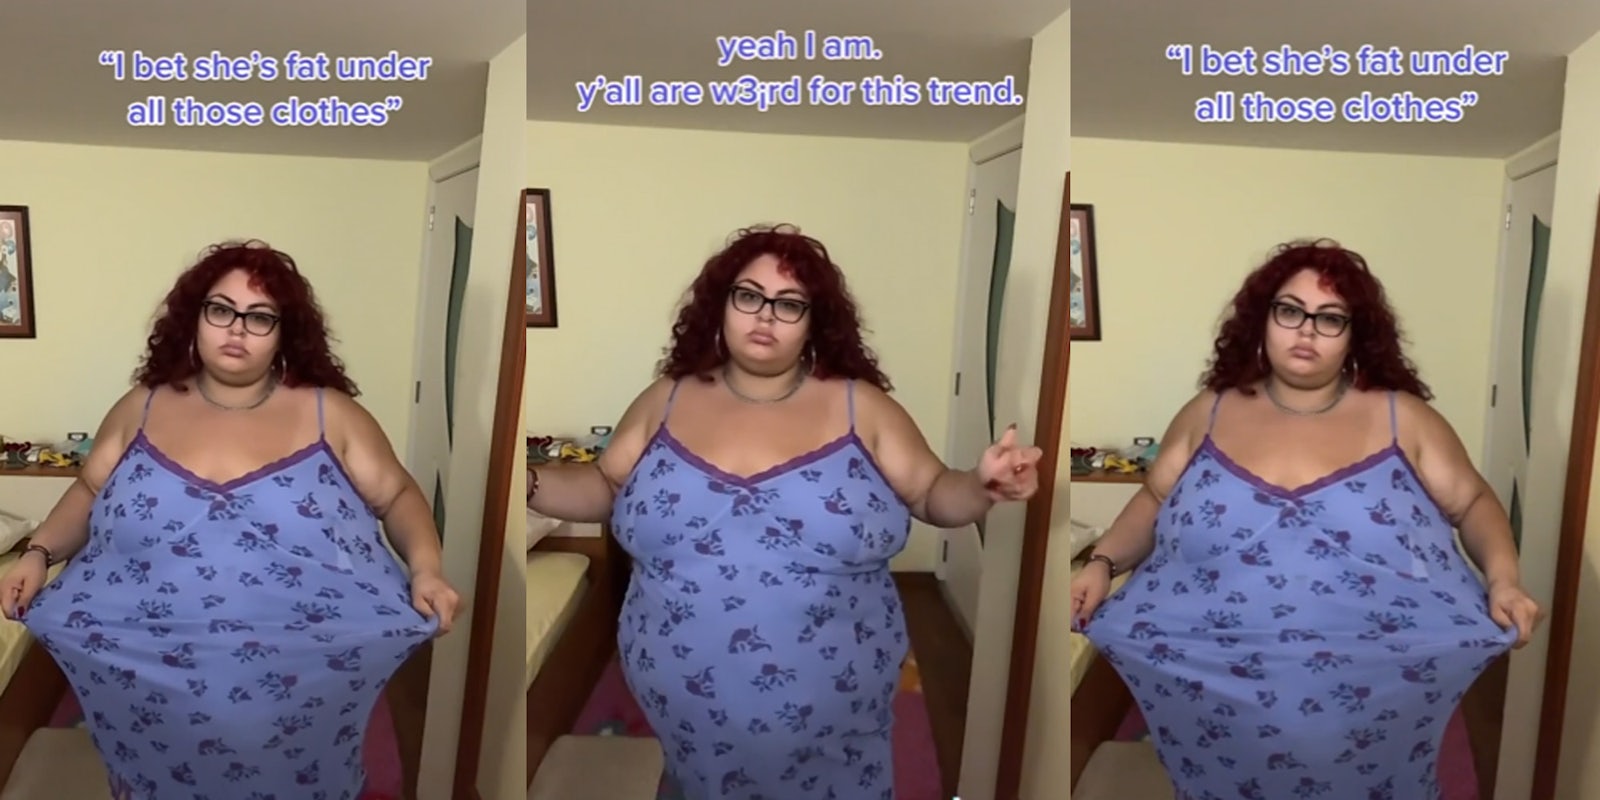 Screenshots from a TikTok showing a woman holding her dress. The text overlays say 'I bet she's fat under all those clothes' and 'yeah I am. y'all are w3;rd for this trend.'